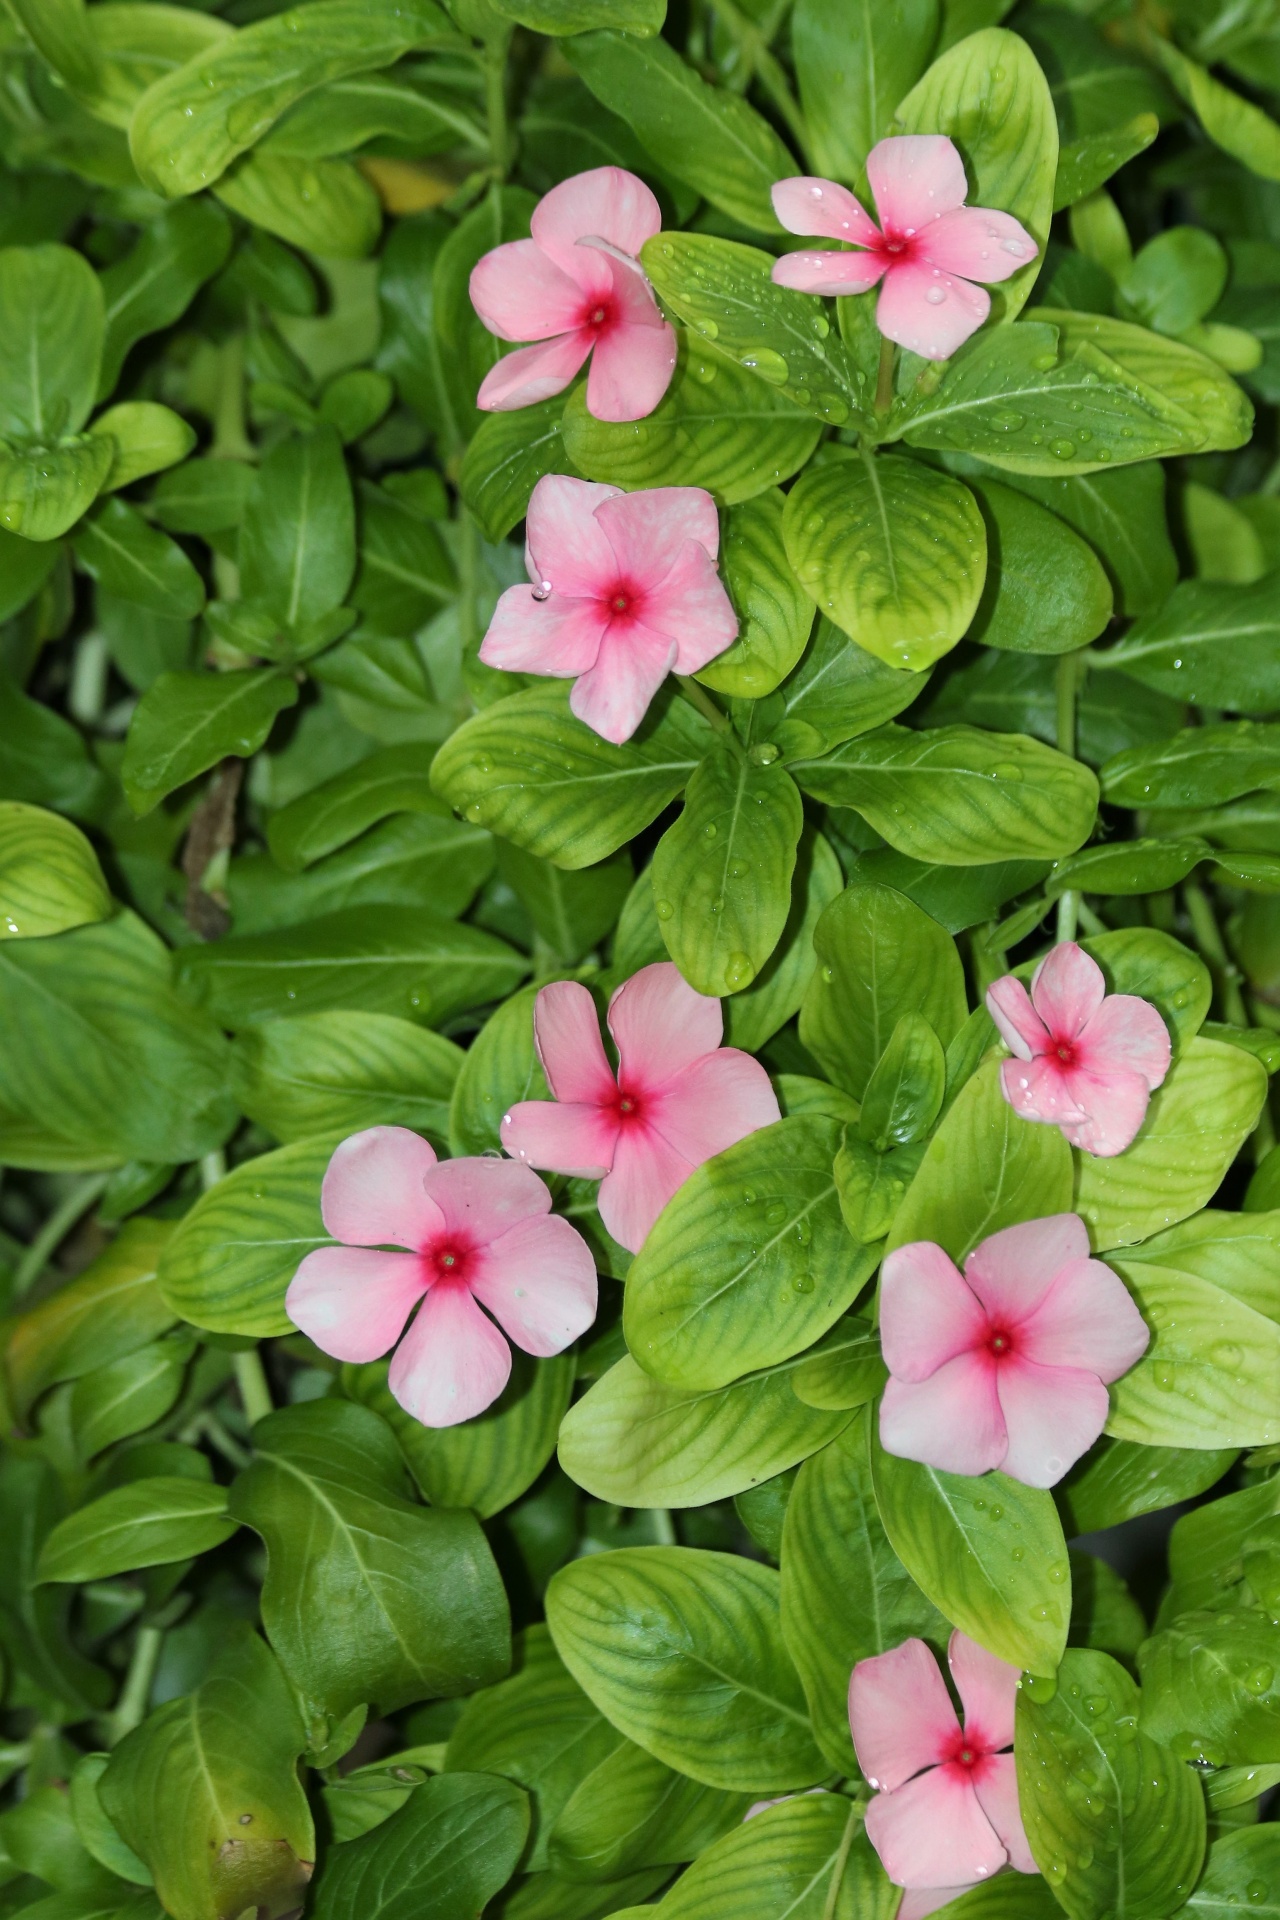 Close-up of pink periwinkle flowers and their green leaves with morning dew, cascading downward in morning light.